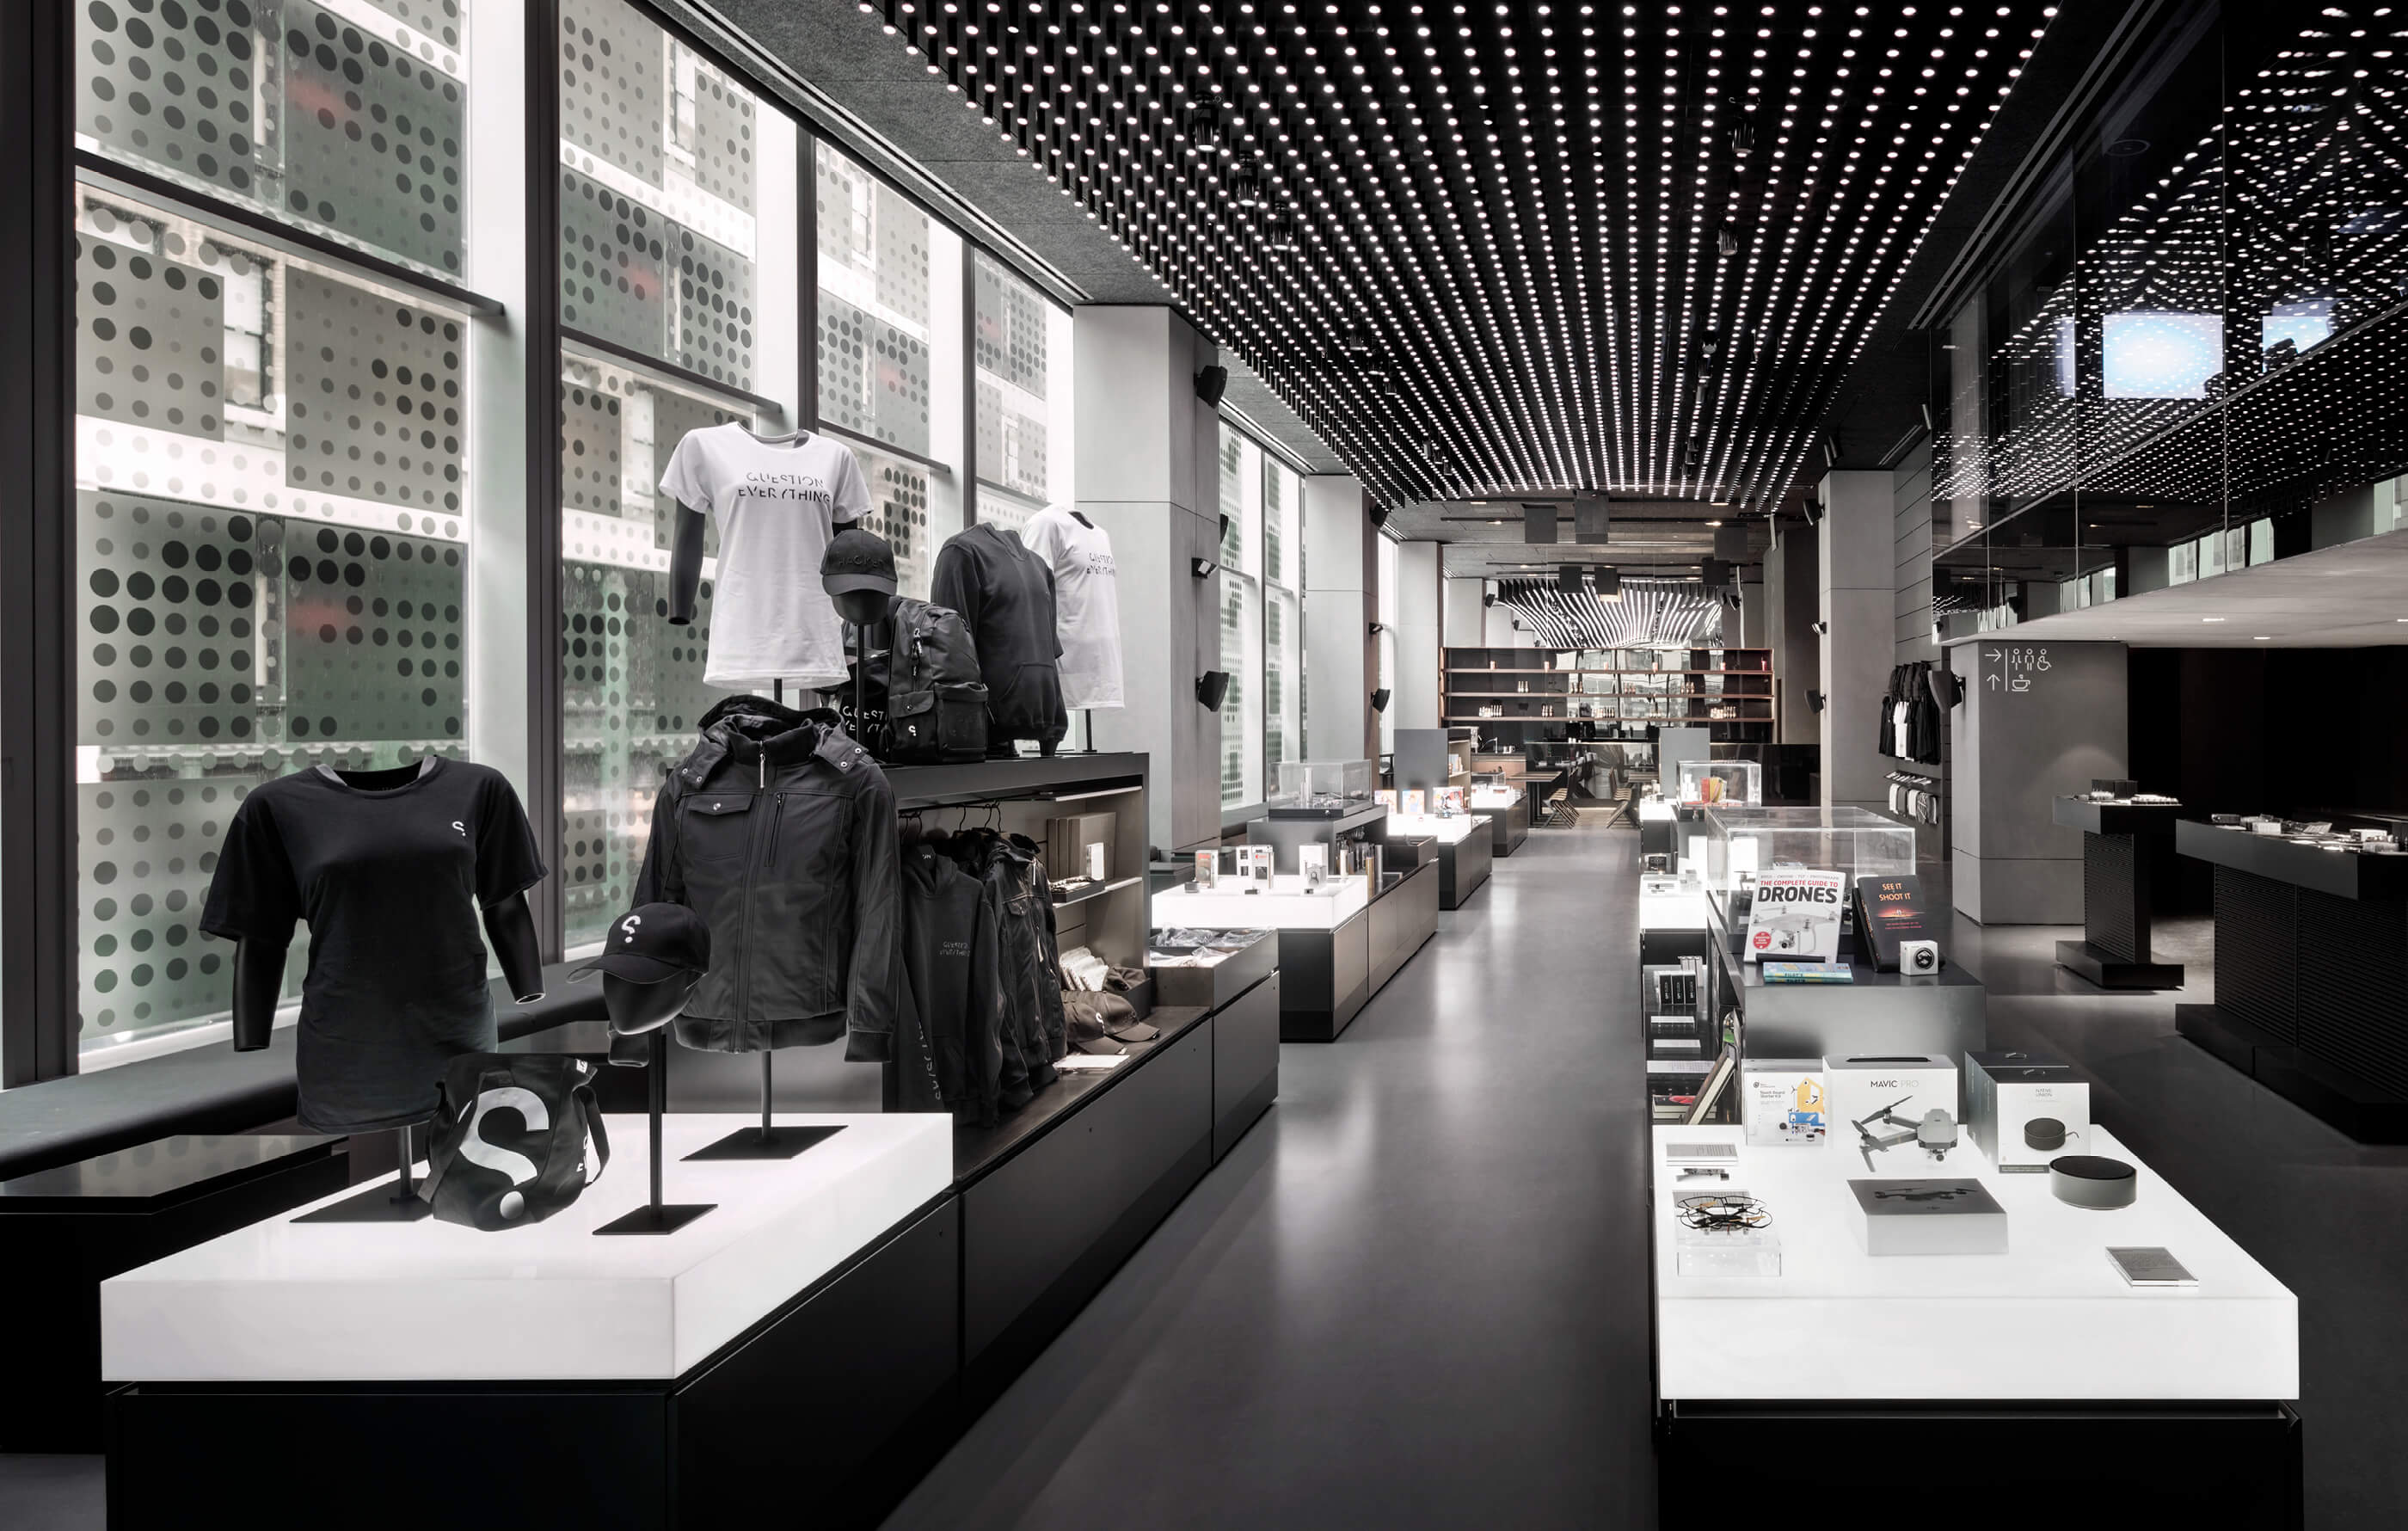 Full screen colour image of the 'Spy Shop' gift shop, designed in cool grey hues with polished concrete floors, black cabinets and white, illuminated display stands